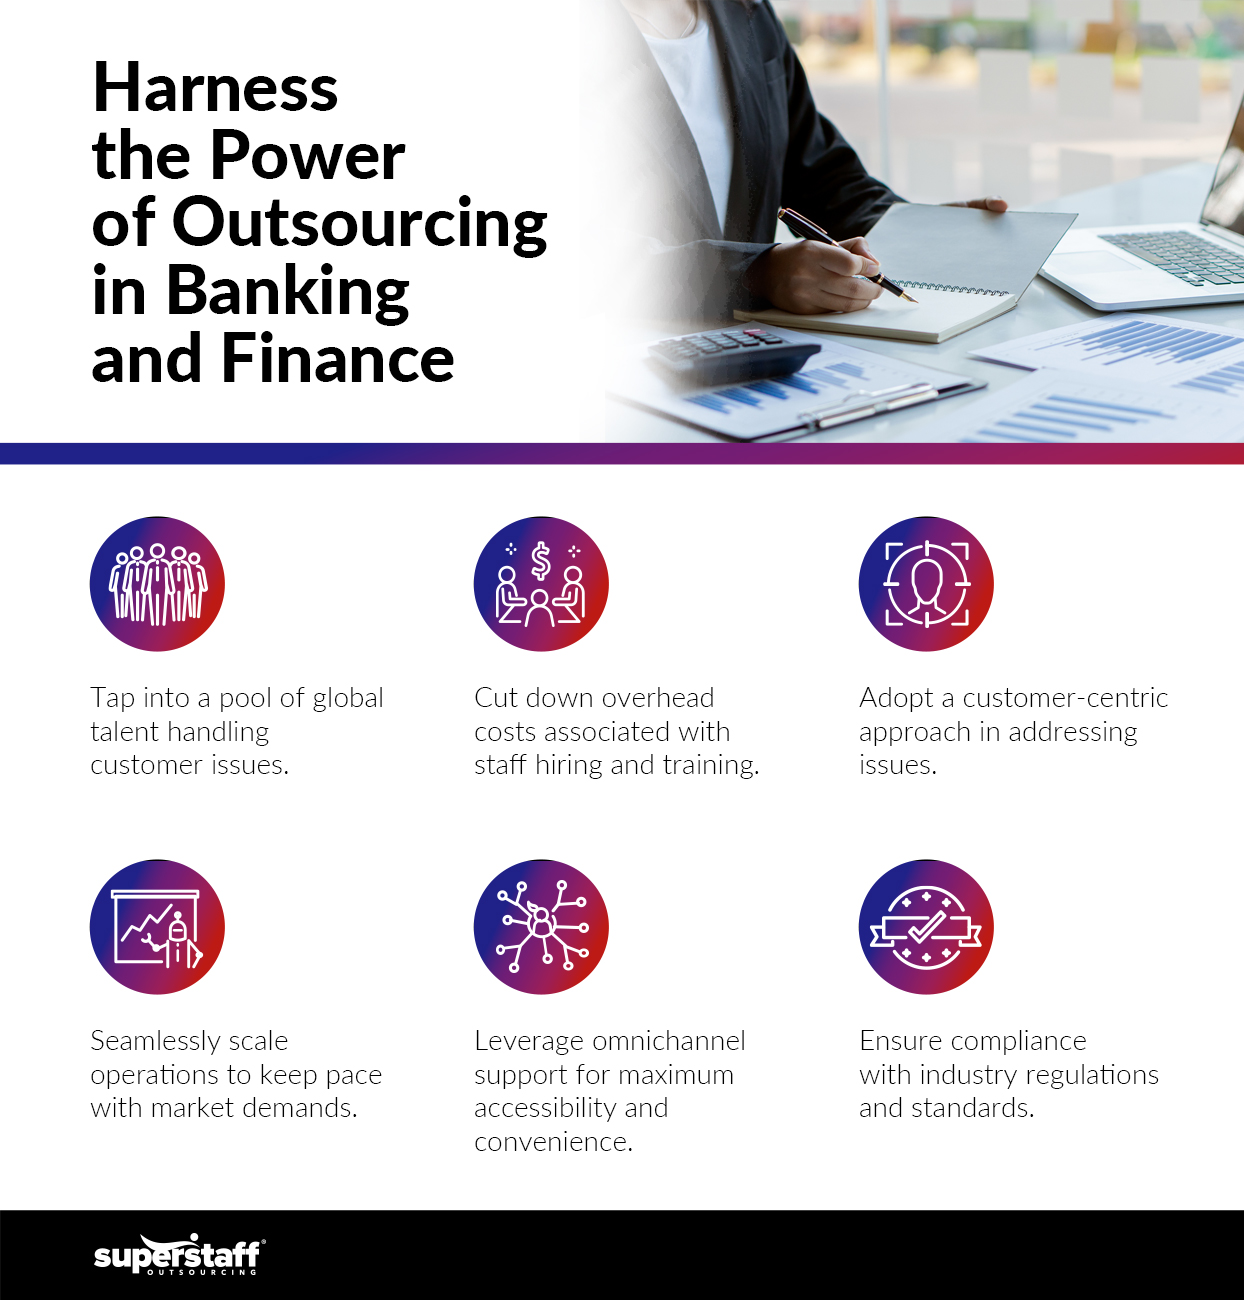 A mini infographic shows how outsourcing empowers banking institutions to improve customer experience